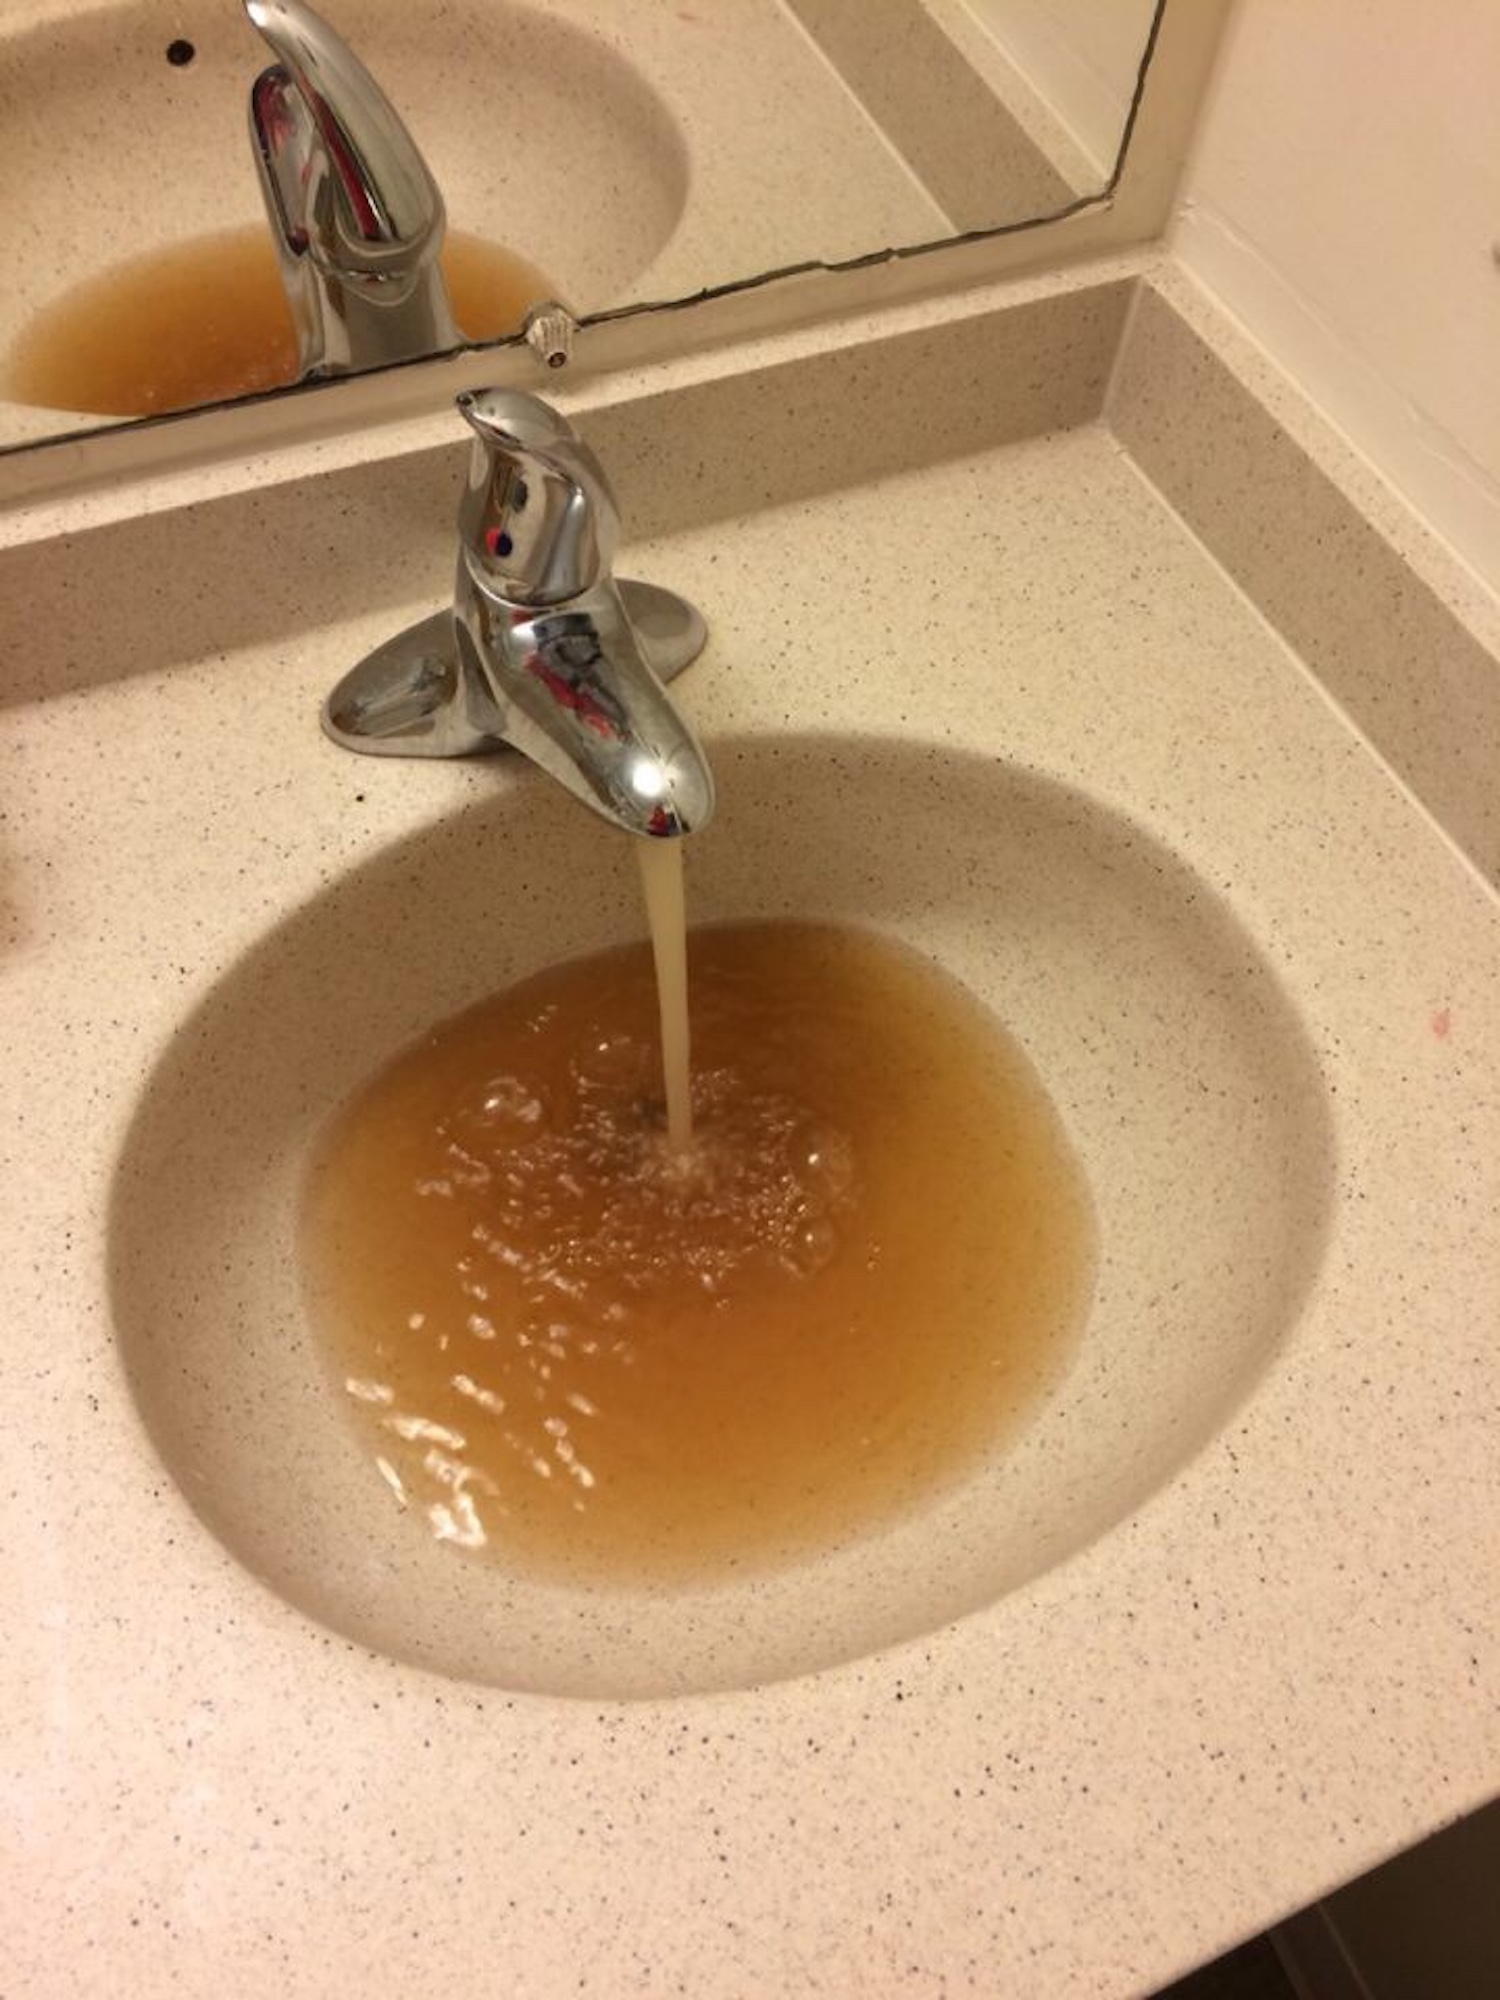 More Student Housing Apartments See Discolored Water Issues The